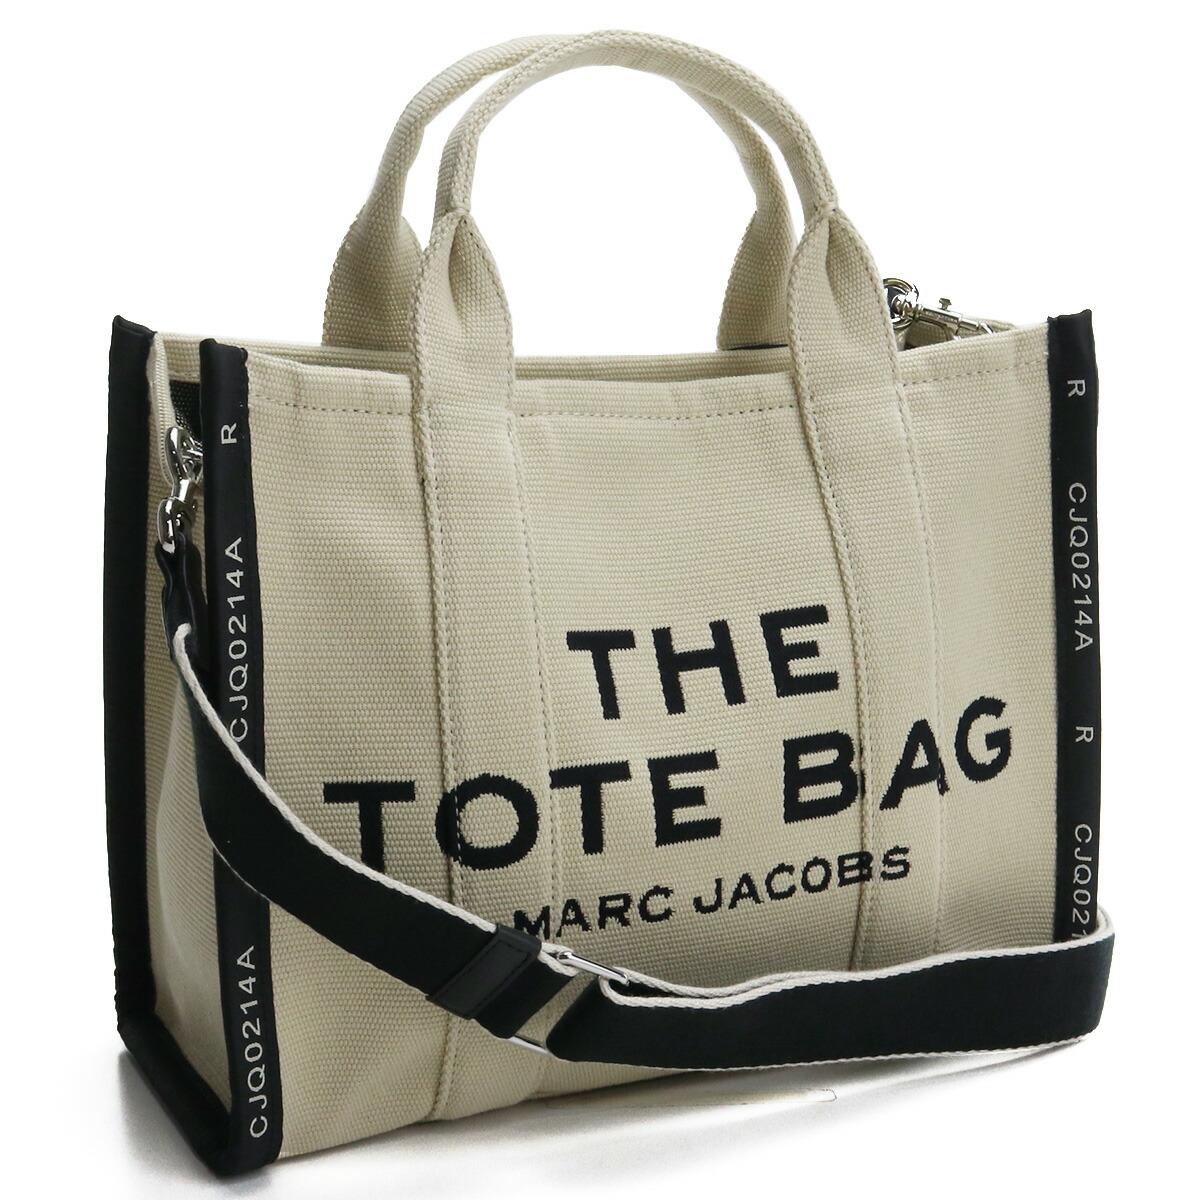 Adds Brand Store / マーク・ジェイコブス MARC JACOBS トートバッグ 